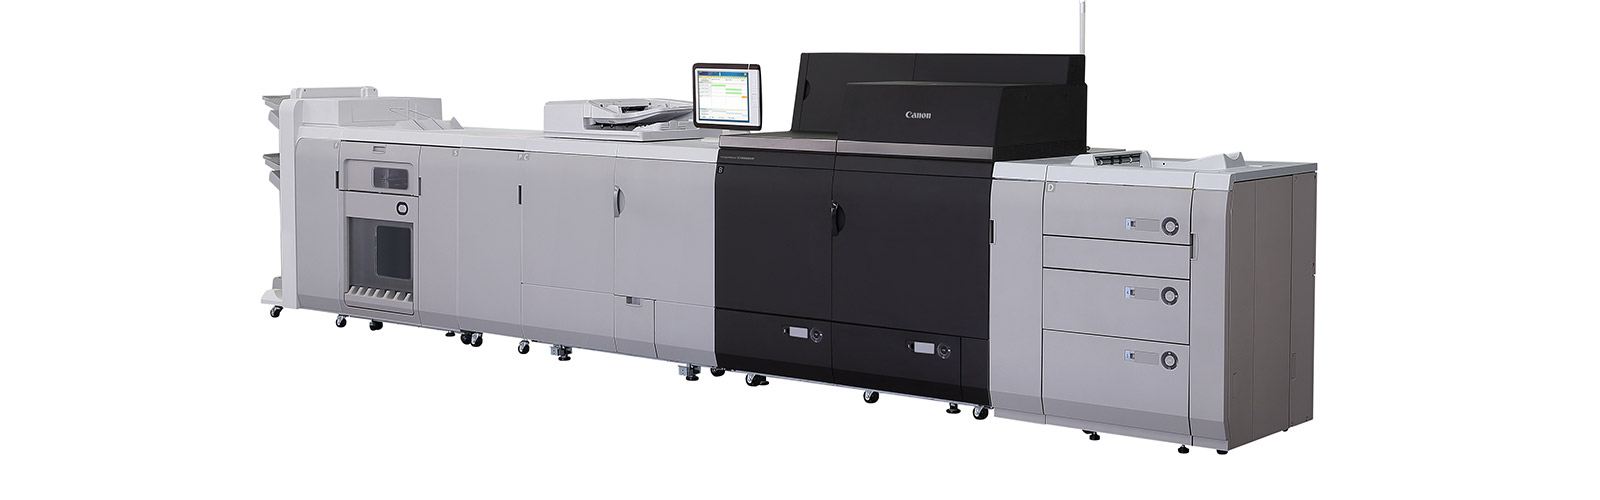 Canon imagePRESS C10000 Scalable